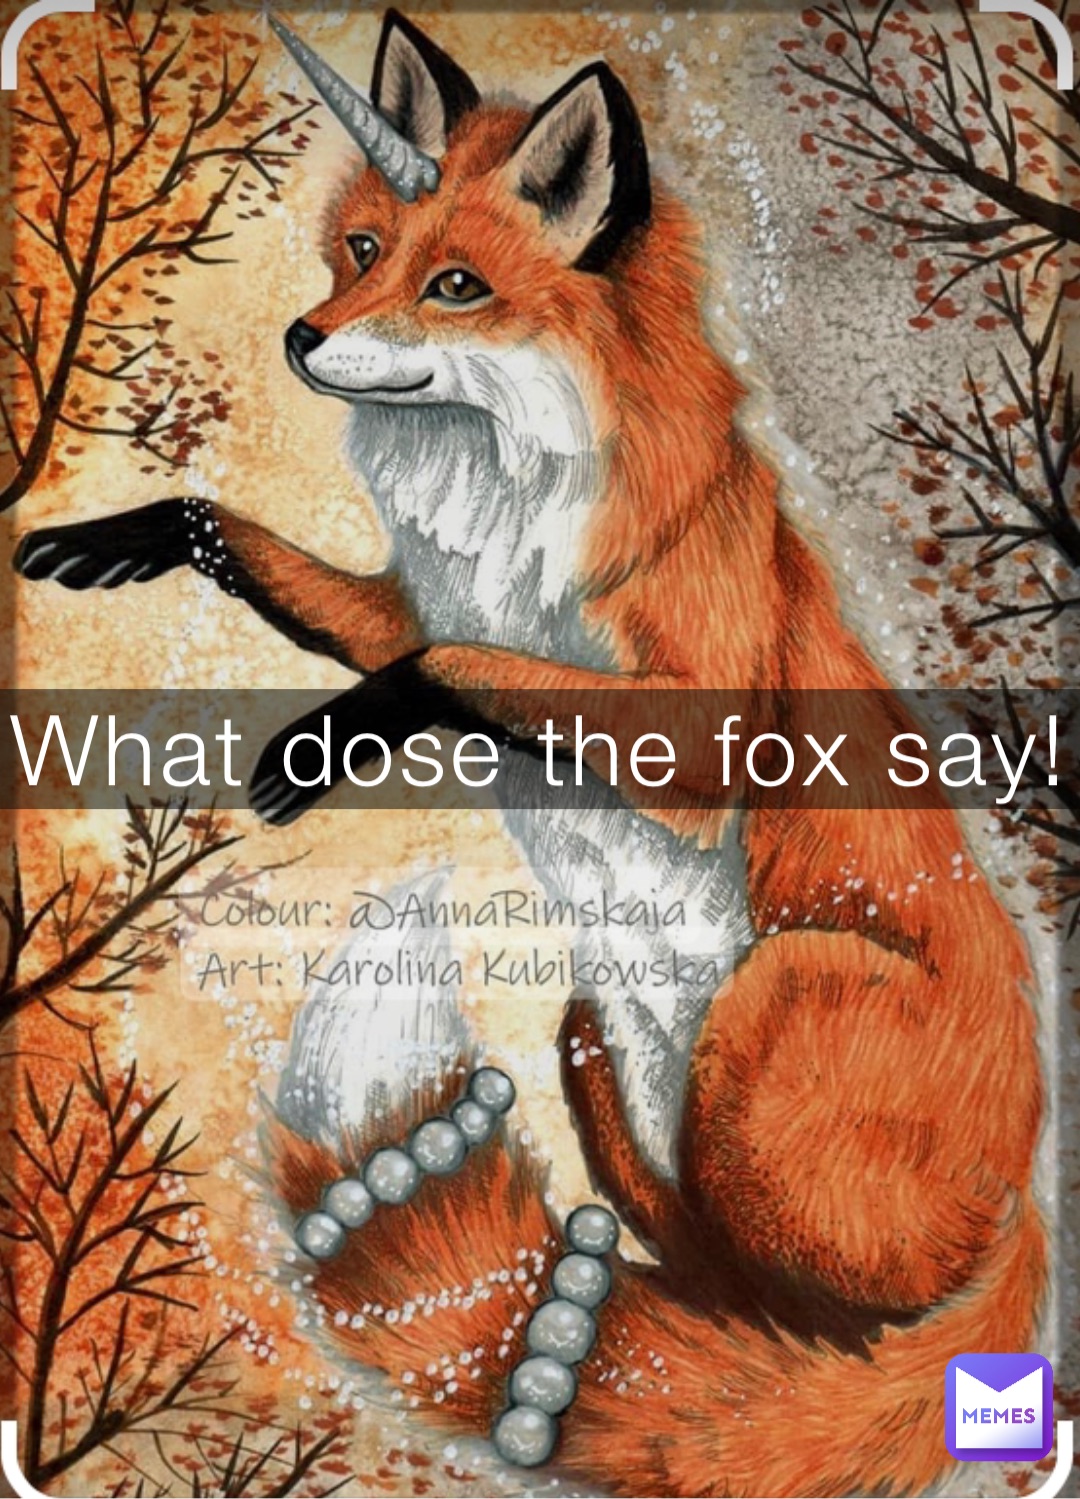 What dose the fox say!